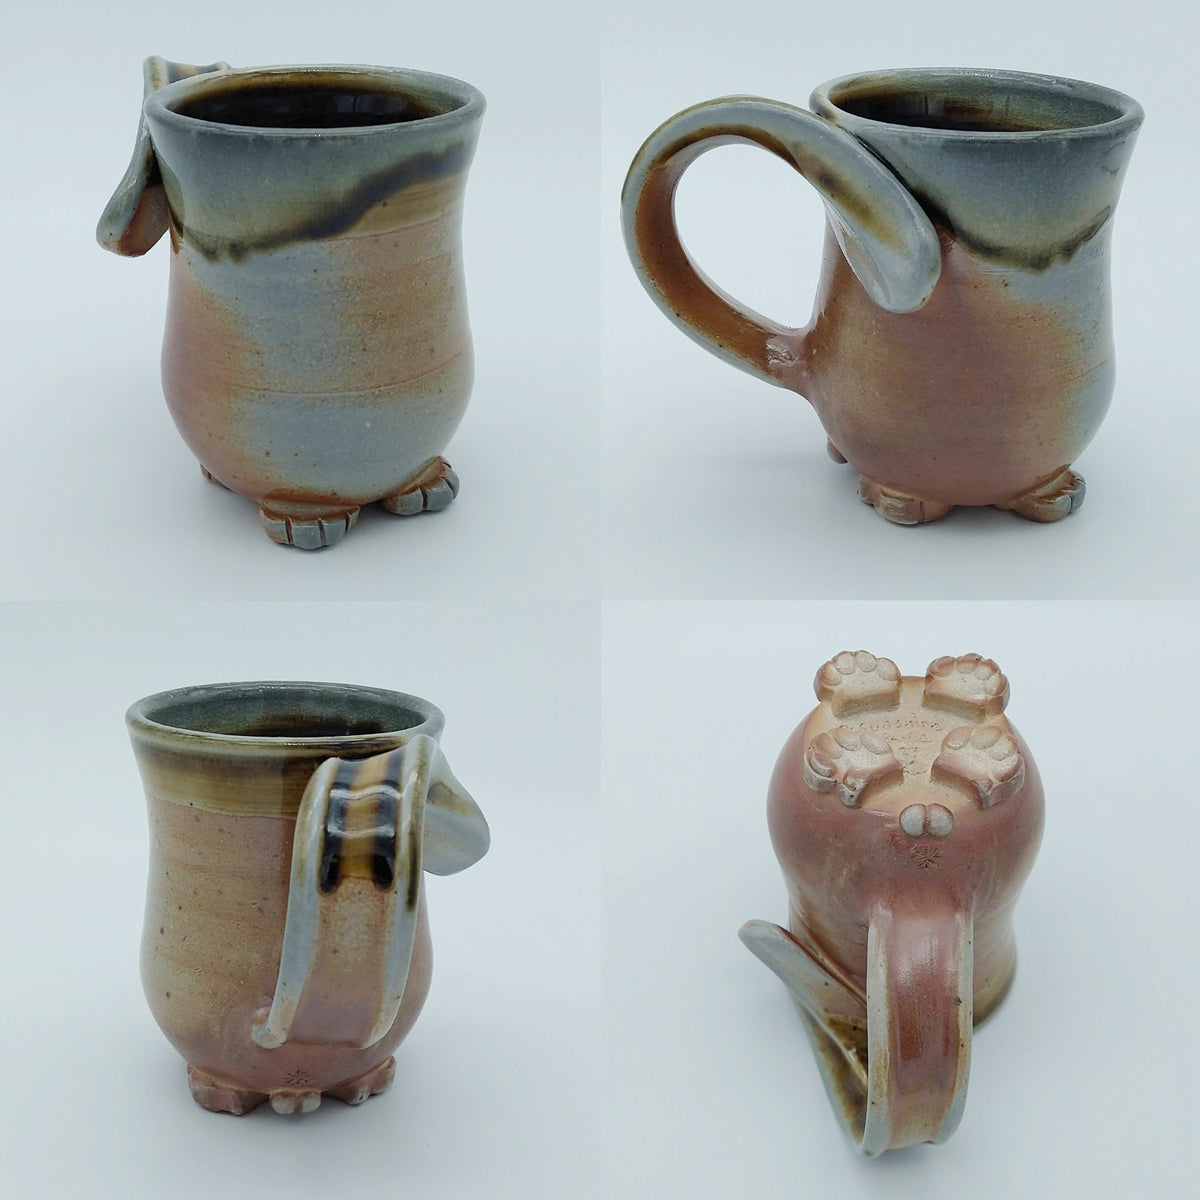 Small Salt or Soda Fired Cat Butt Mugs - approx. 8 to 9 oz